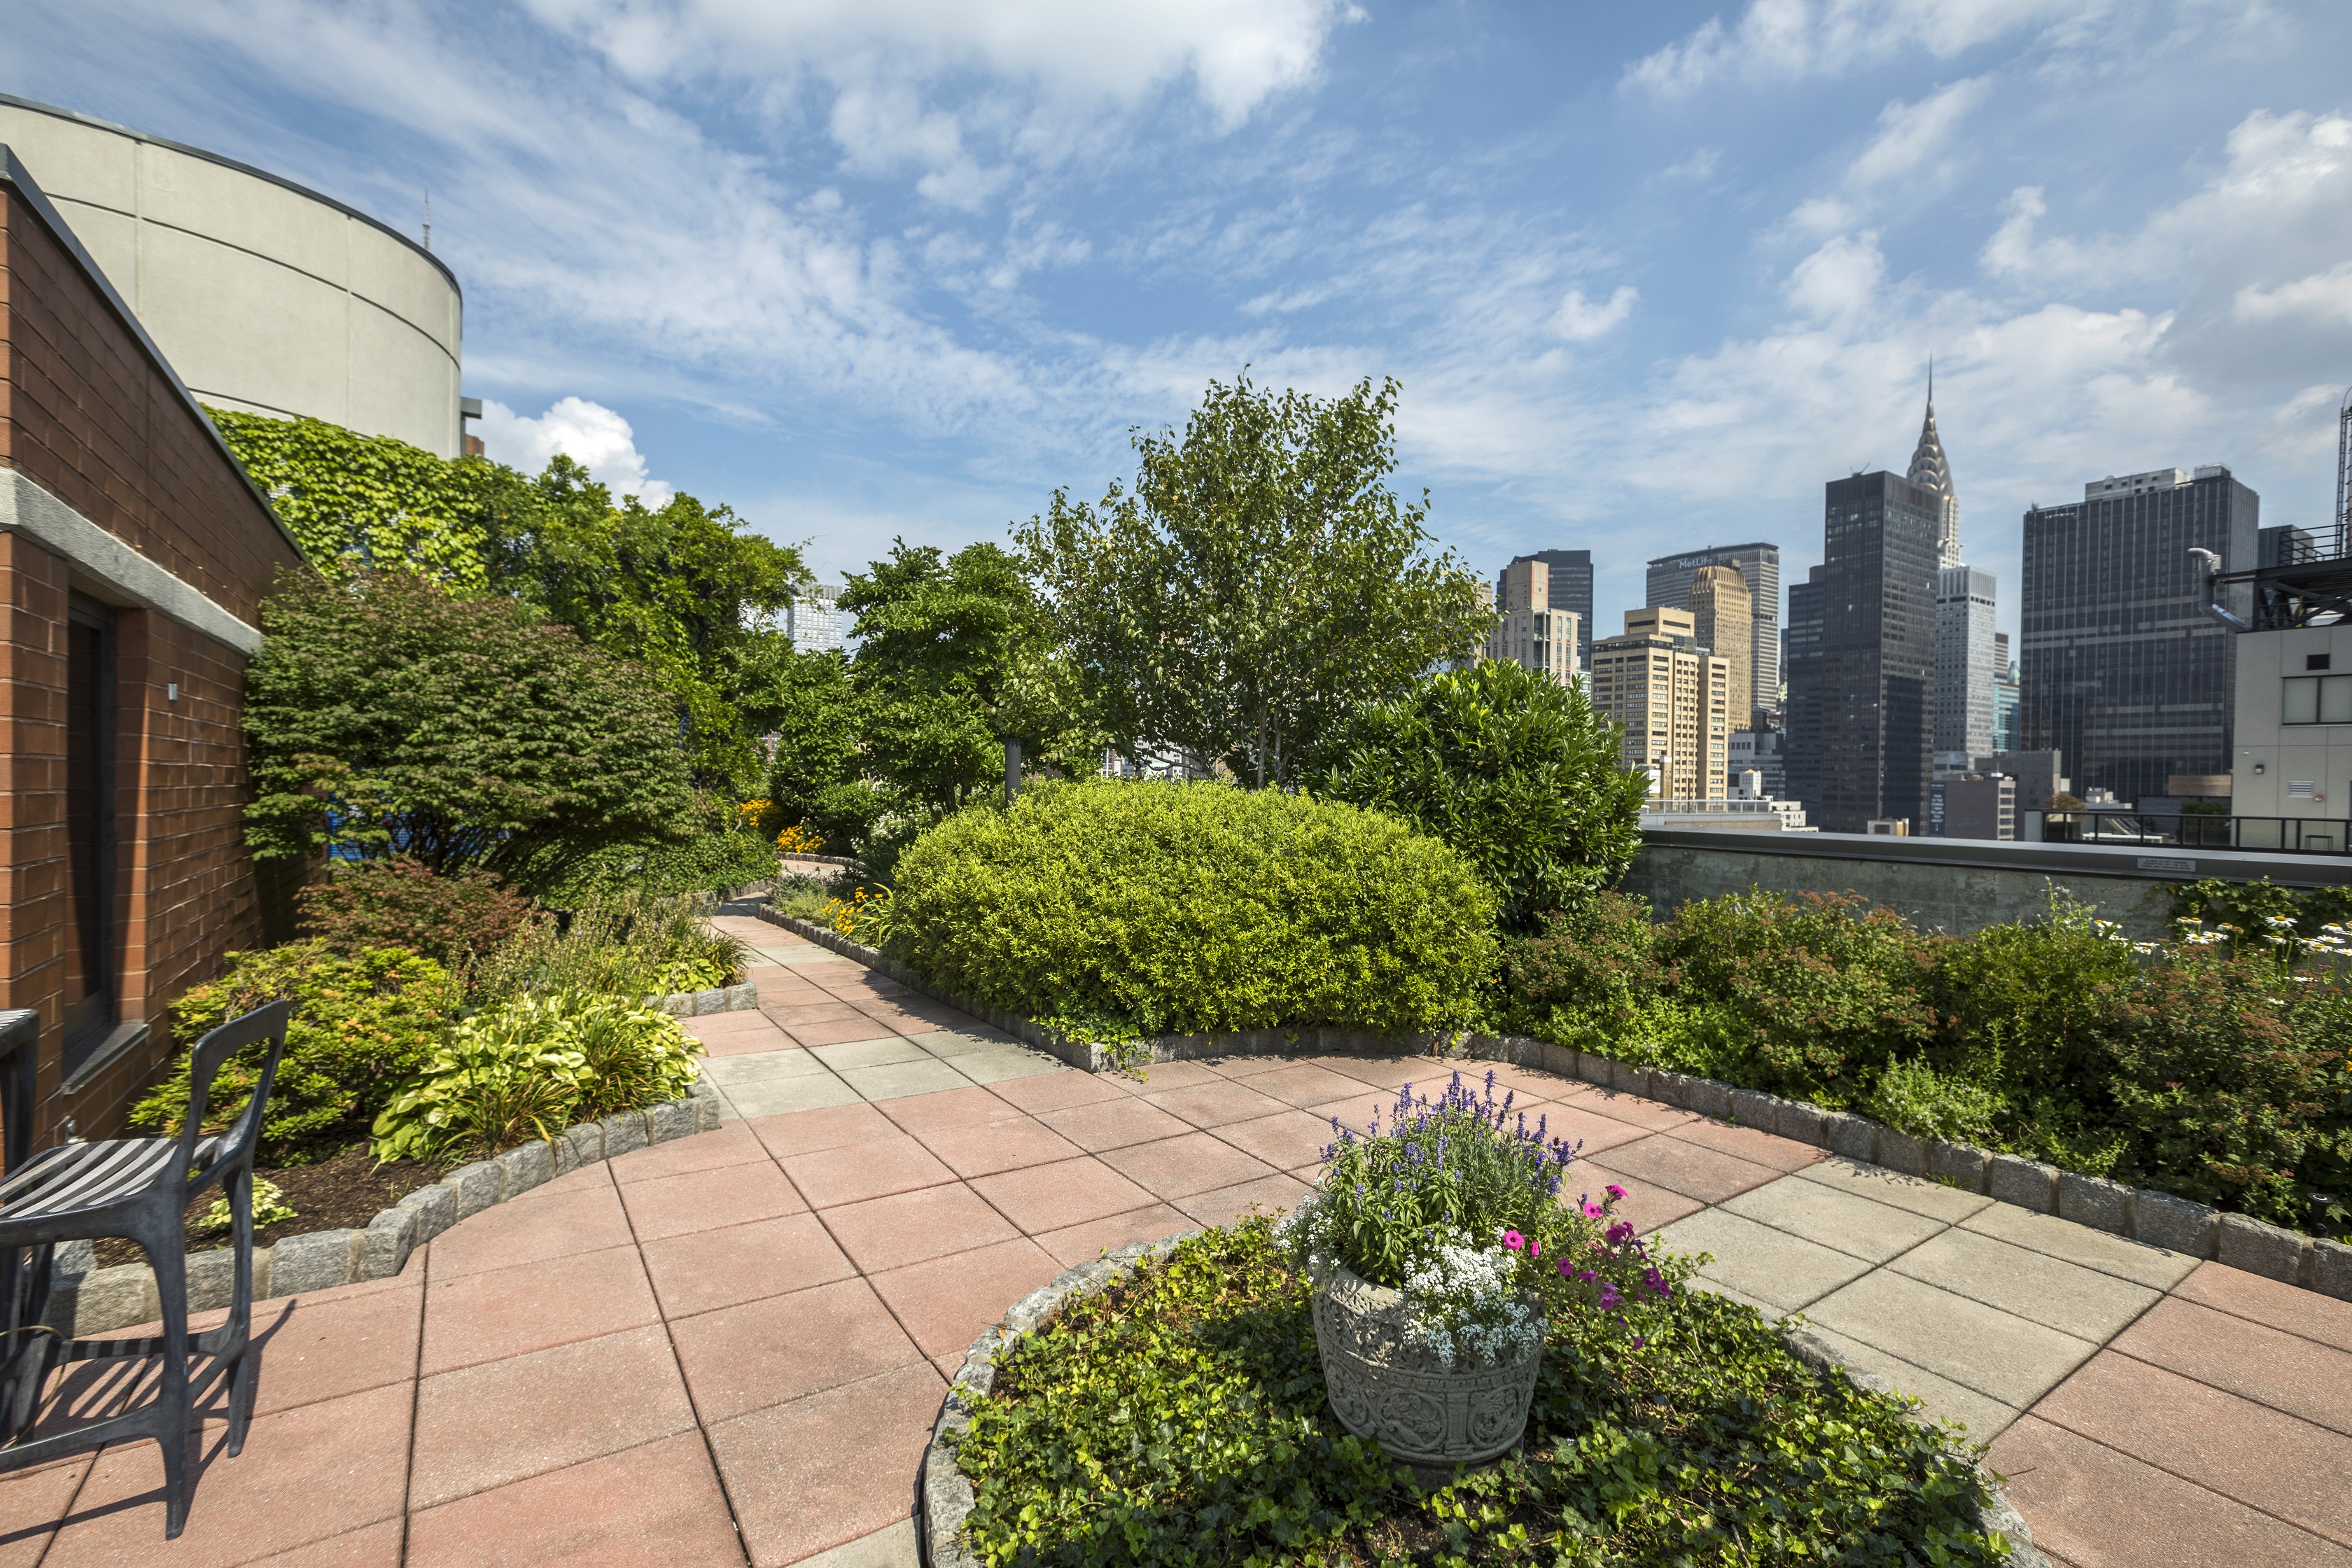 Get a bird’s eye view as you wind your way through the path of this endless rooftop garden sanctuary.